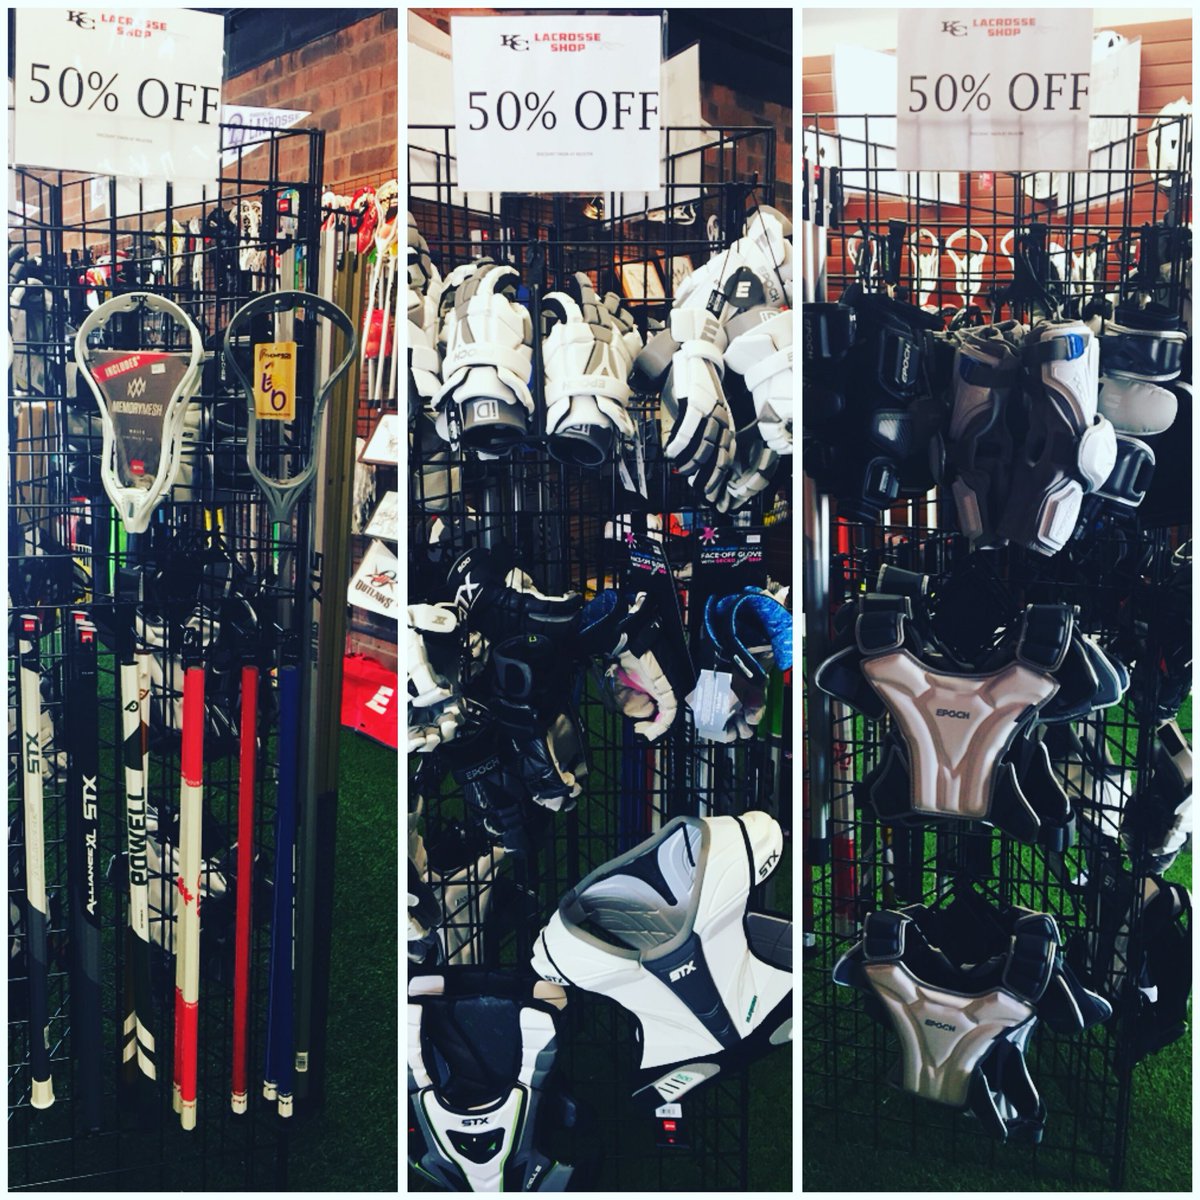 Big sales going on!! Stop by and #savebig only @kclacrosseshop #limitedquantities #firstcomefirstserve #getitnow